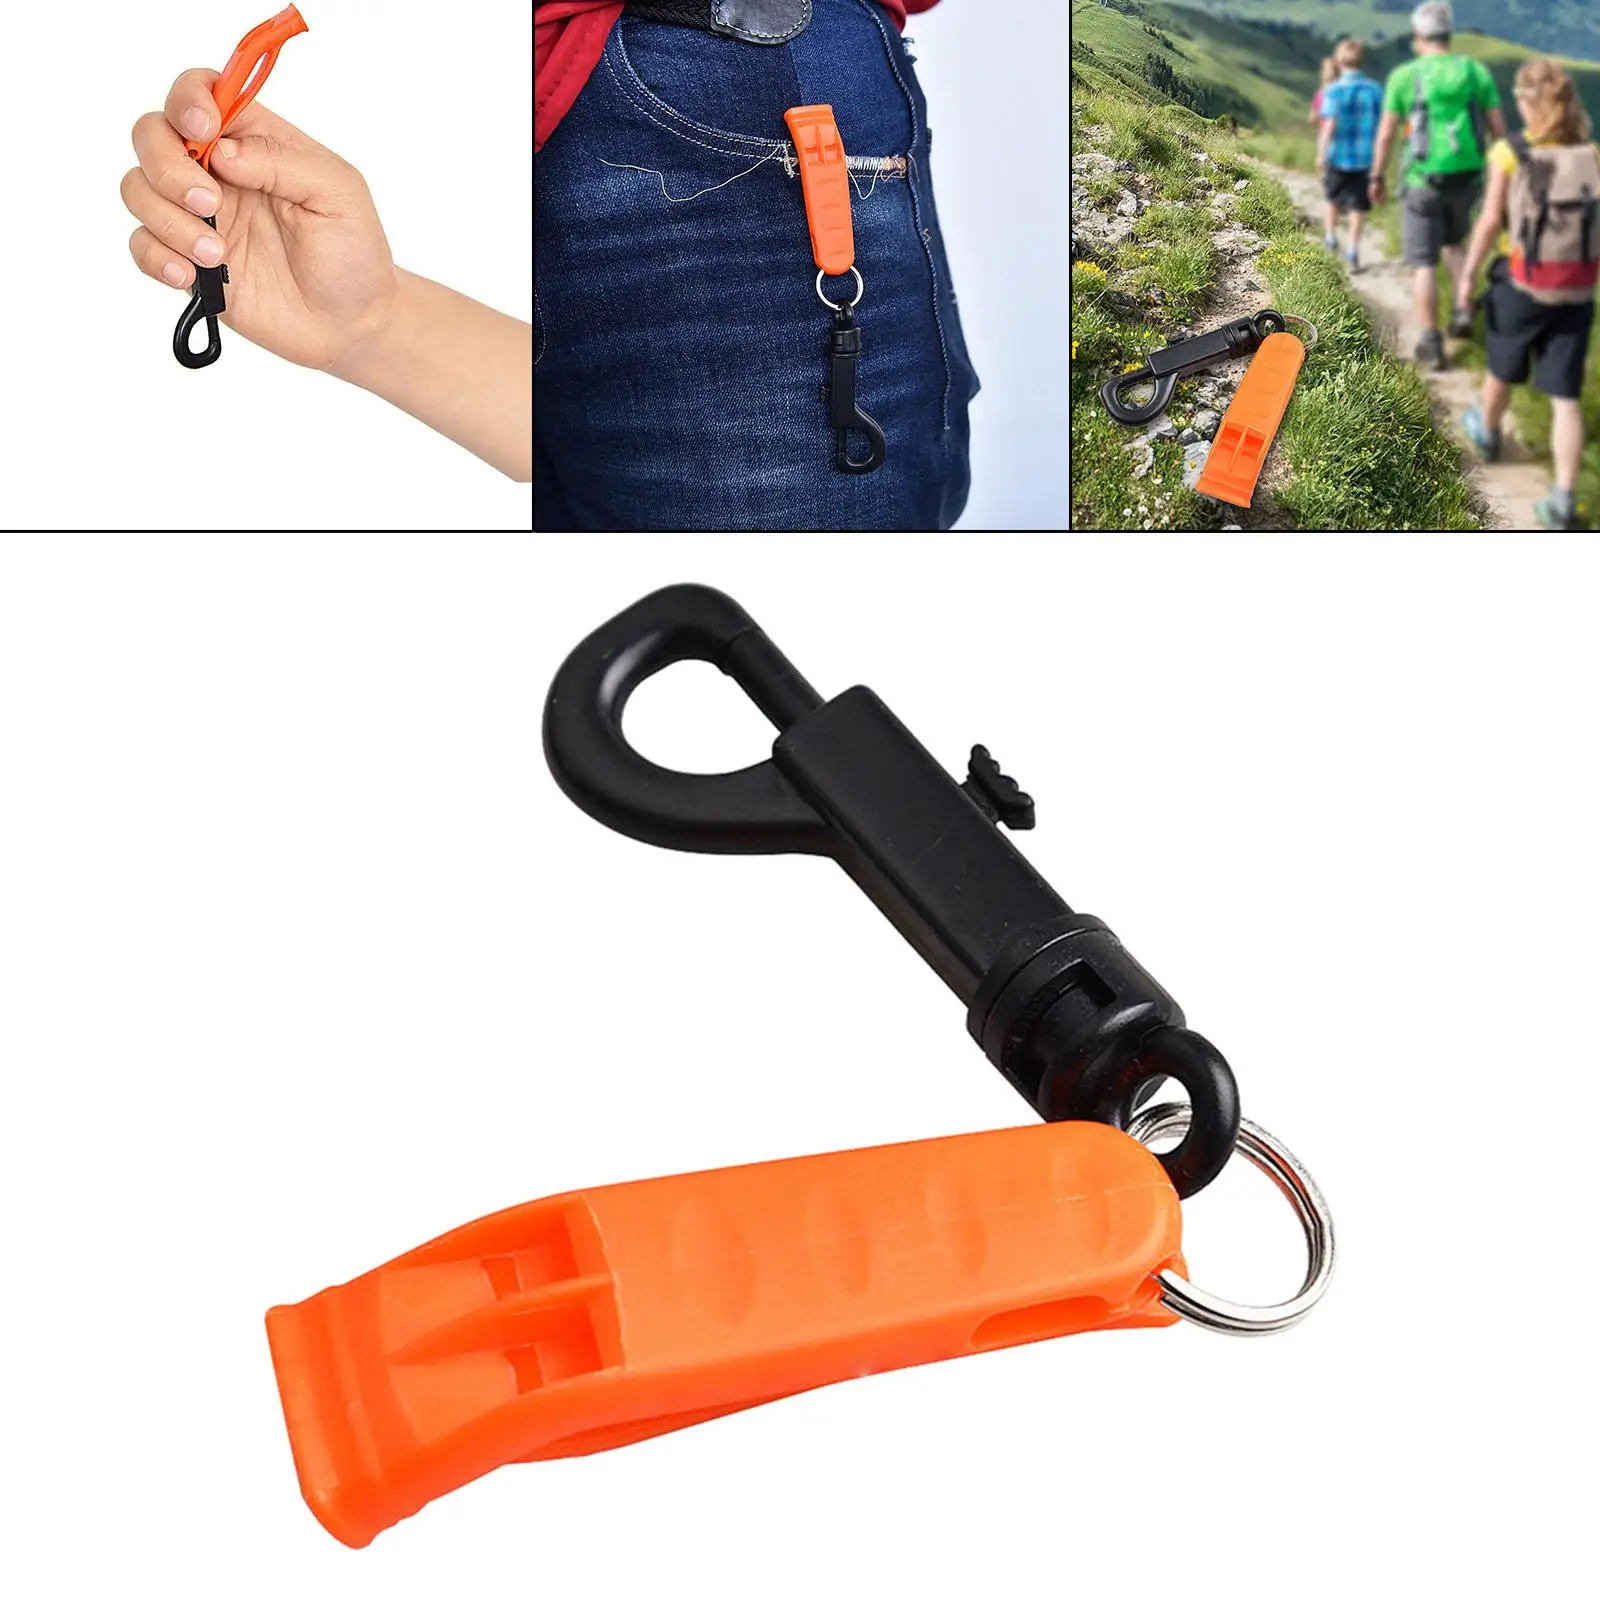 

Lightweight Emergency Whistle Survival Whistle with Hook Kids Adults Loud Sound for Football Basketball Boating Camping Hiking